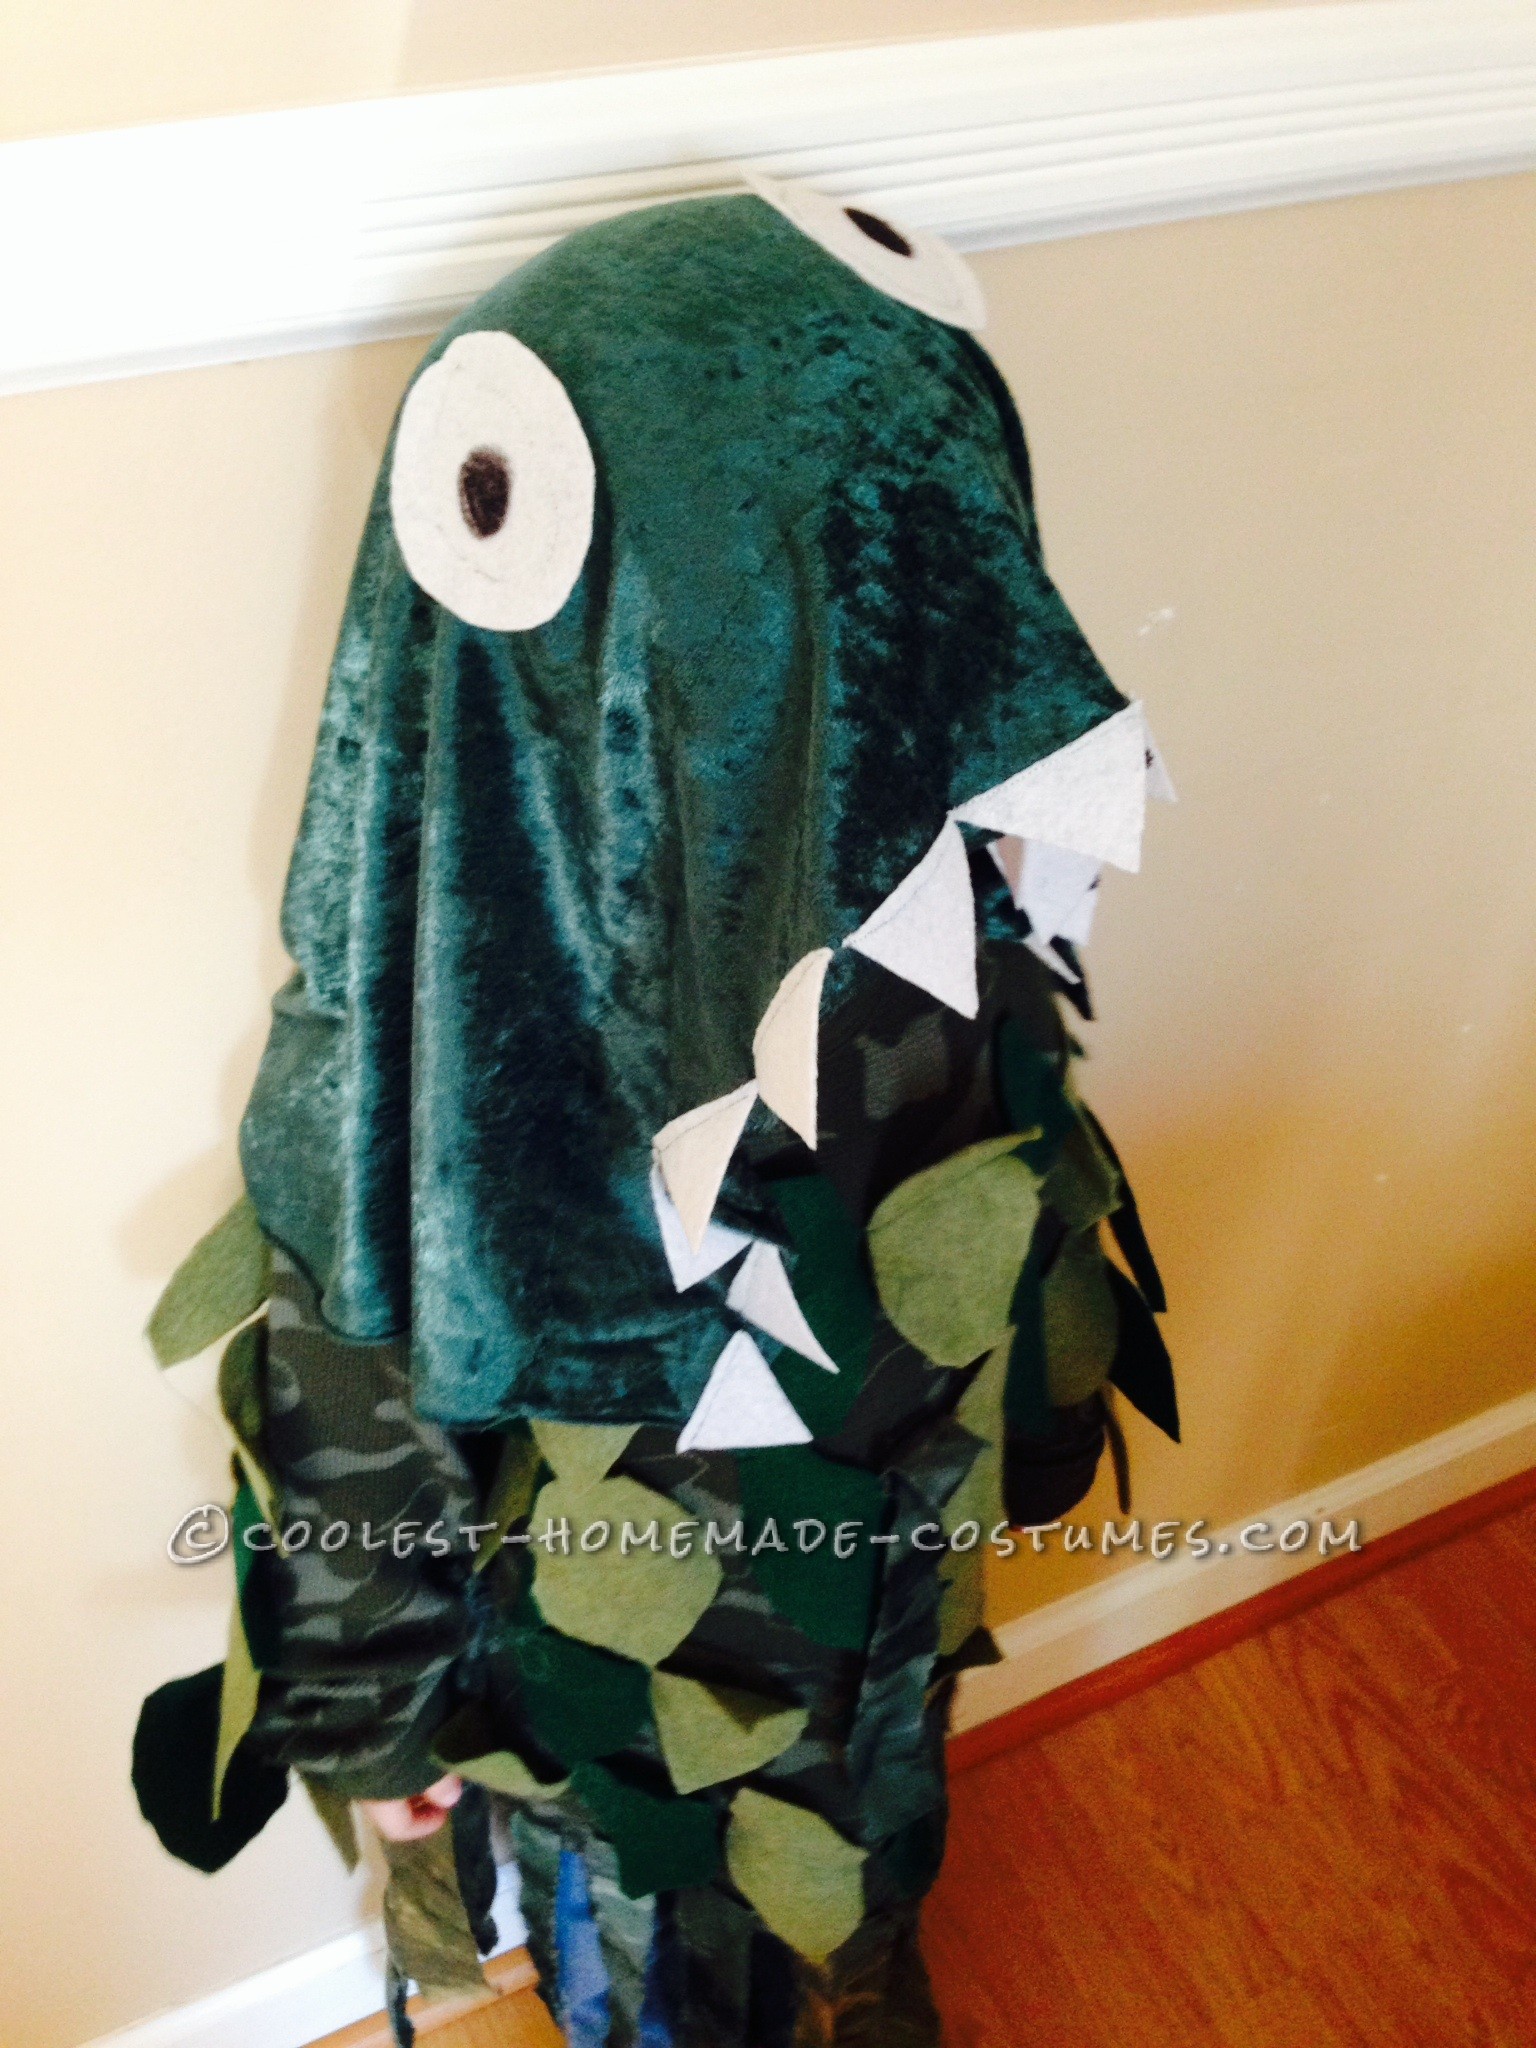 Cool Homemade Swamp Monster Costume for a Boy